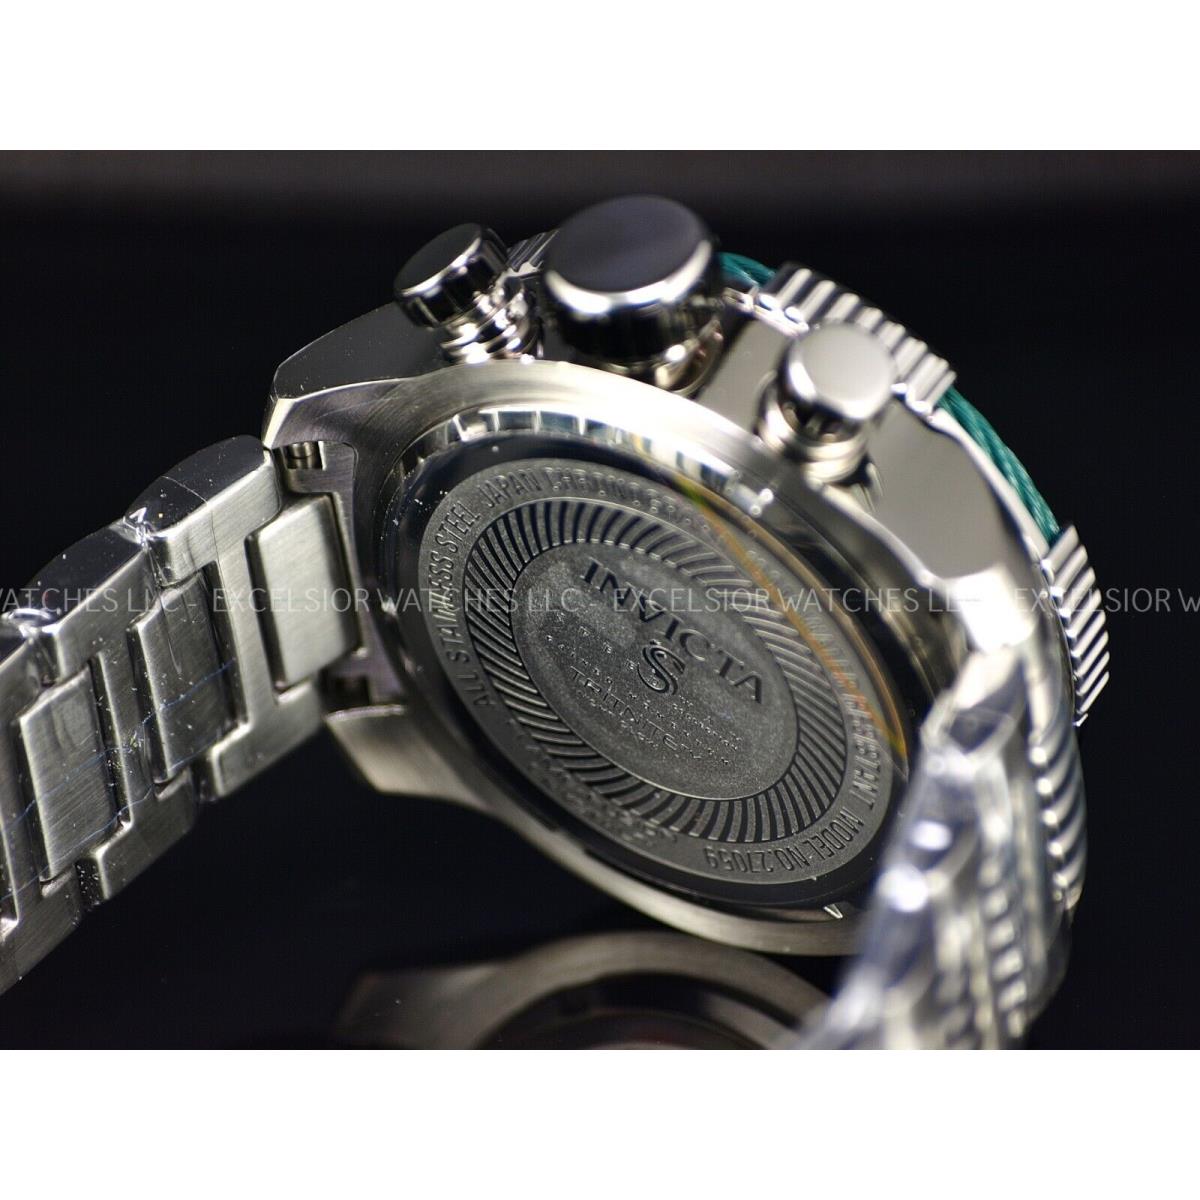 Invicta watch Speedway - Silver Dial, Silver Band, Green Bezel